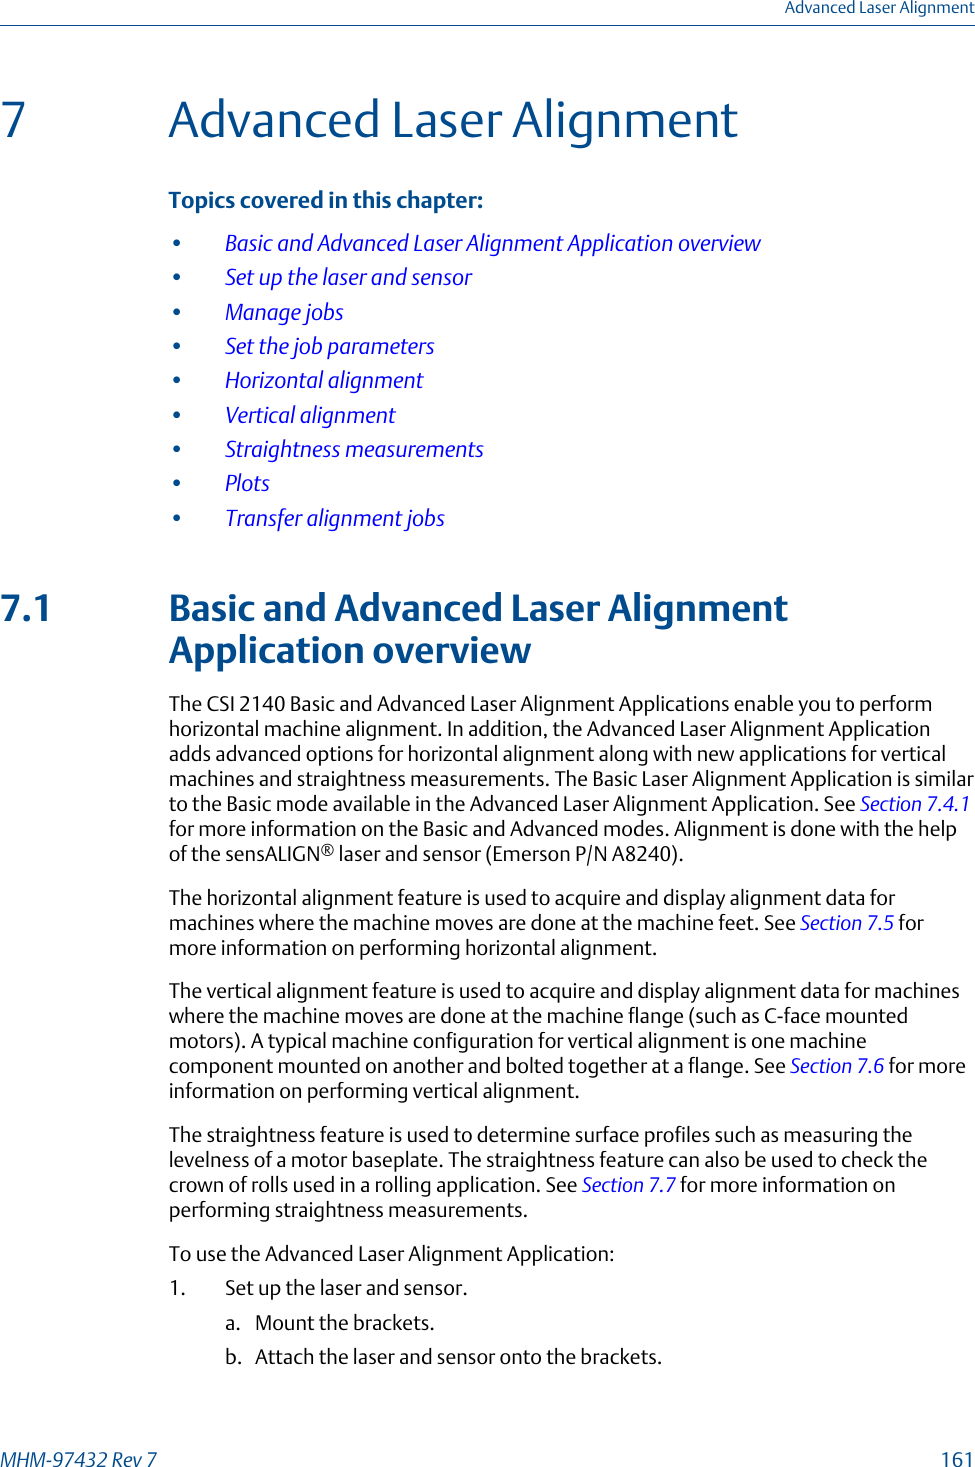 7 Advanced Laser AlignmentTopics covered in this chapter:•Basic and Advanced Laser Alignment Application overview•Set up the laser and sensor•Manage jobs•Set the job parameters•Horizontal alignment•Vertical alignment•Straightness measurements•Plots•Transfer alignment jobs7.1 Basic and Advanced Laser AlignmentApplication overviewThe CSI 2140 Basic and Advanced Laser Alignment Applications enable you to performhorizontal machine alignment. In addition, the Advanced Laser Alignment Applicationadds advanced options for horizontal alignment along with new applications for verticalmachines and straightness measurements. The Basic Laser Alignment Application is similarto the Basic mode available in the Advanced Laser Alignment Application. See Section 7.4.1for more information on the Basic and Advanced modes. Alignment is done with the helpof the sensALIGN® laser and sensor (Emerson P/N A8240).The horizontal alignment feature is used to acquire and display alignment data formachines where the machine moves are done at the machine feet. See Section 7.5 formore information on performing horizontal alignment.The vertical alignment feature is used to acquire and display alignment data for machineswhere the machine moves are done at the machine flange (such as C-face mountedmotors). A typical machine configuration for vertical alignment is one machinecomponent mounted on another and bolted together at a flange. See Section 7.6 for moreinformation on performing vertical alignment.The straightness feature is used to determine surface profiles such as measuring thelevelness of a motor baseplate. The straightness feature can also be used to check thecrown of rolls used in a rolling application. See Section 7.7 for more information onperforming straightness measurements.To use the Advanced Laser Alignment Application:1. Set up the laser and sensor.a. Mount the brackets.b. Attach the laser and sensor onto the brackets.Advanced Laser AlignmentMHM-97432 Rev 7  161